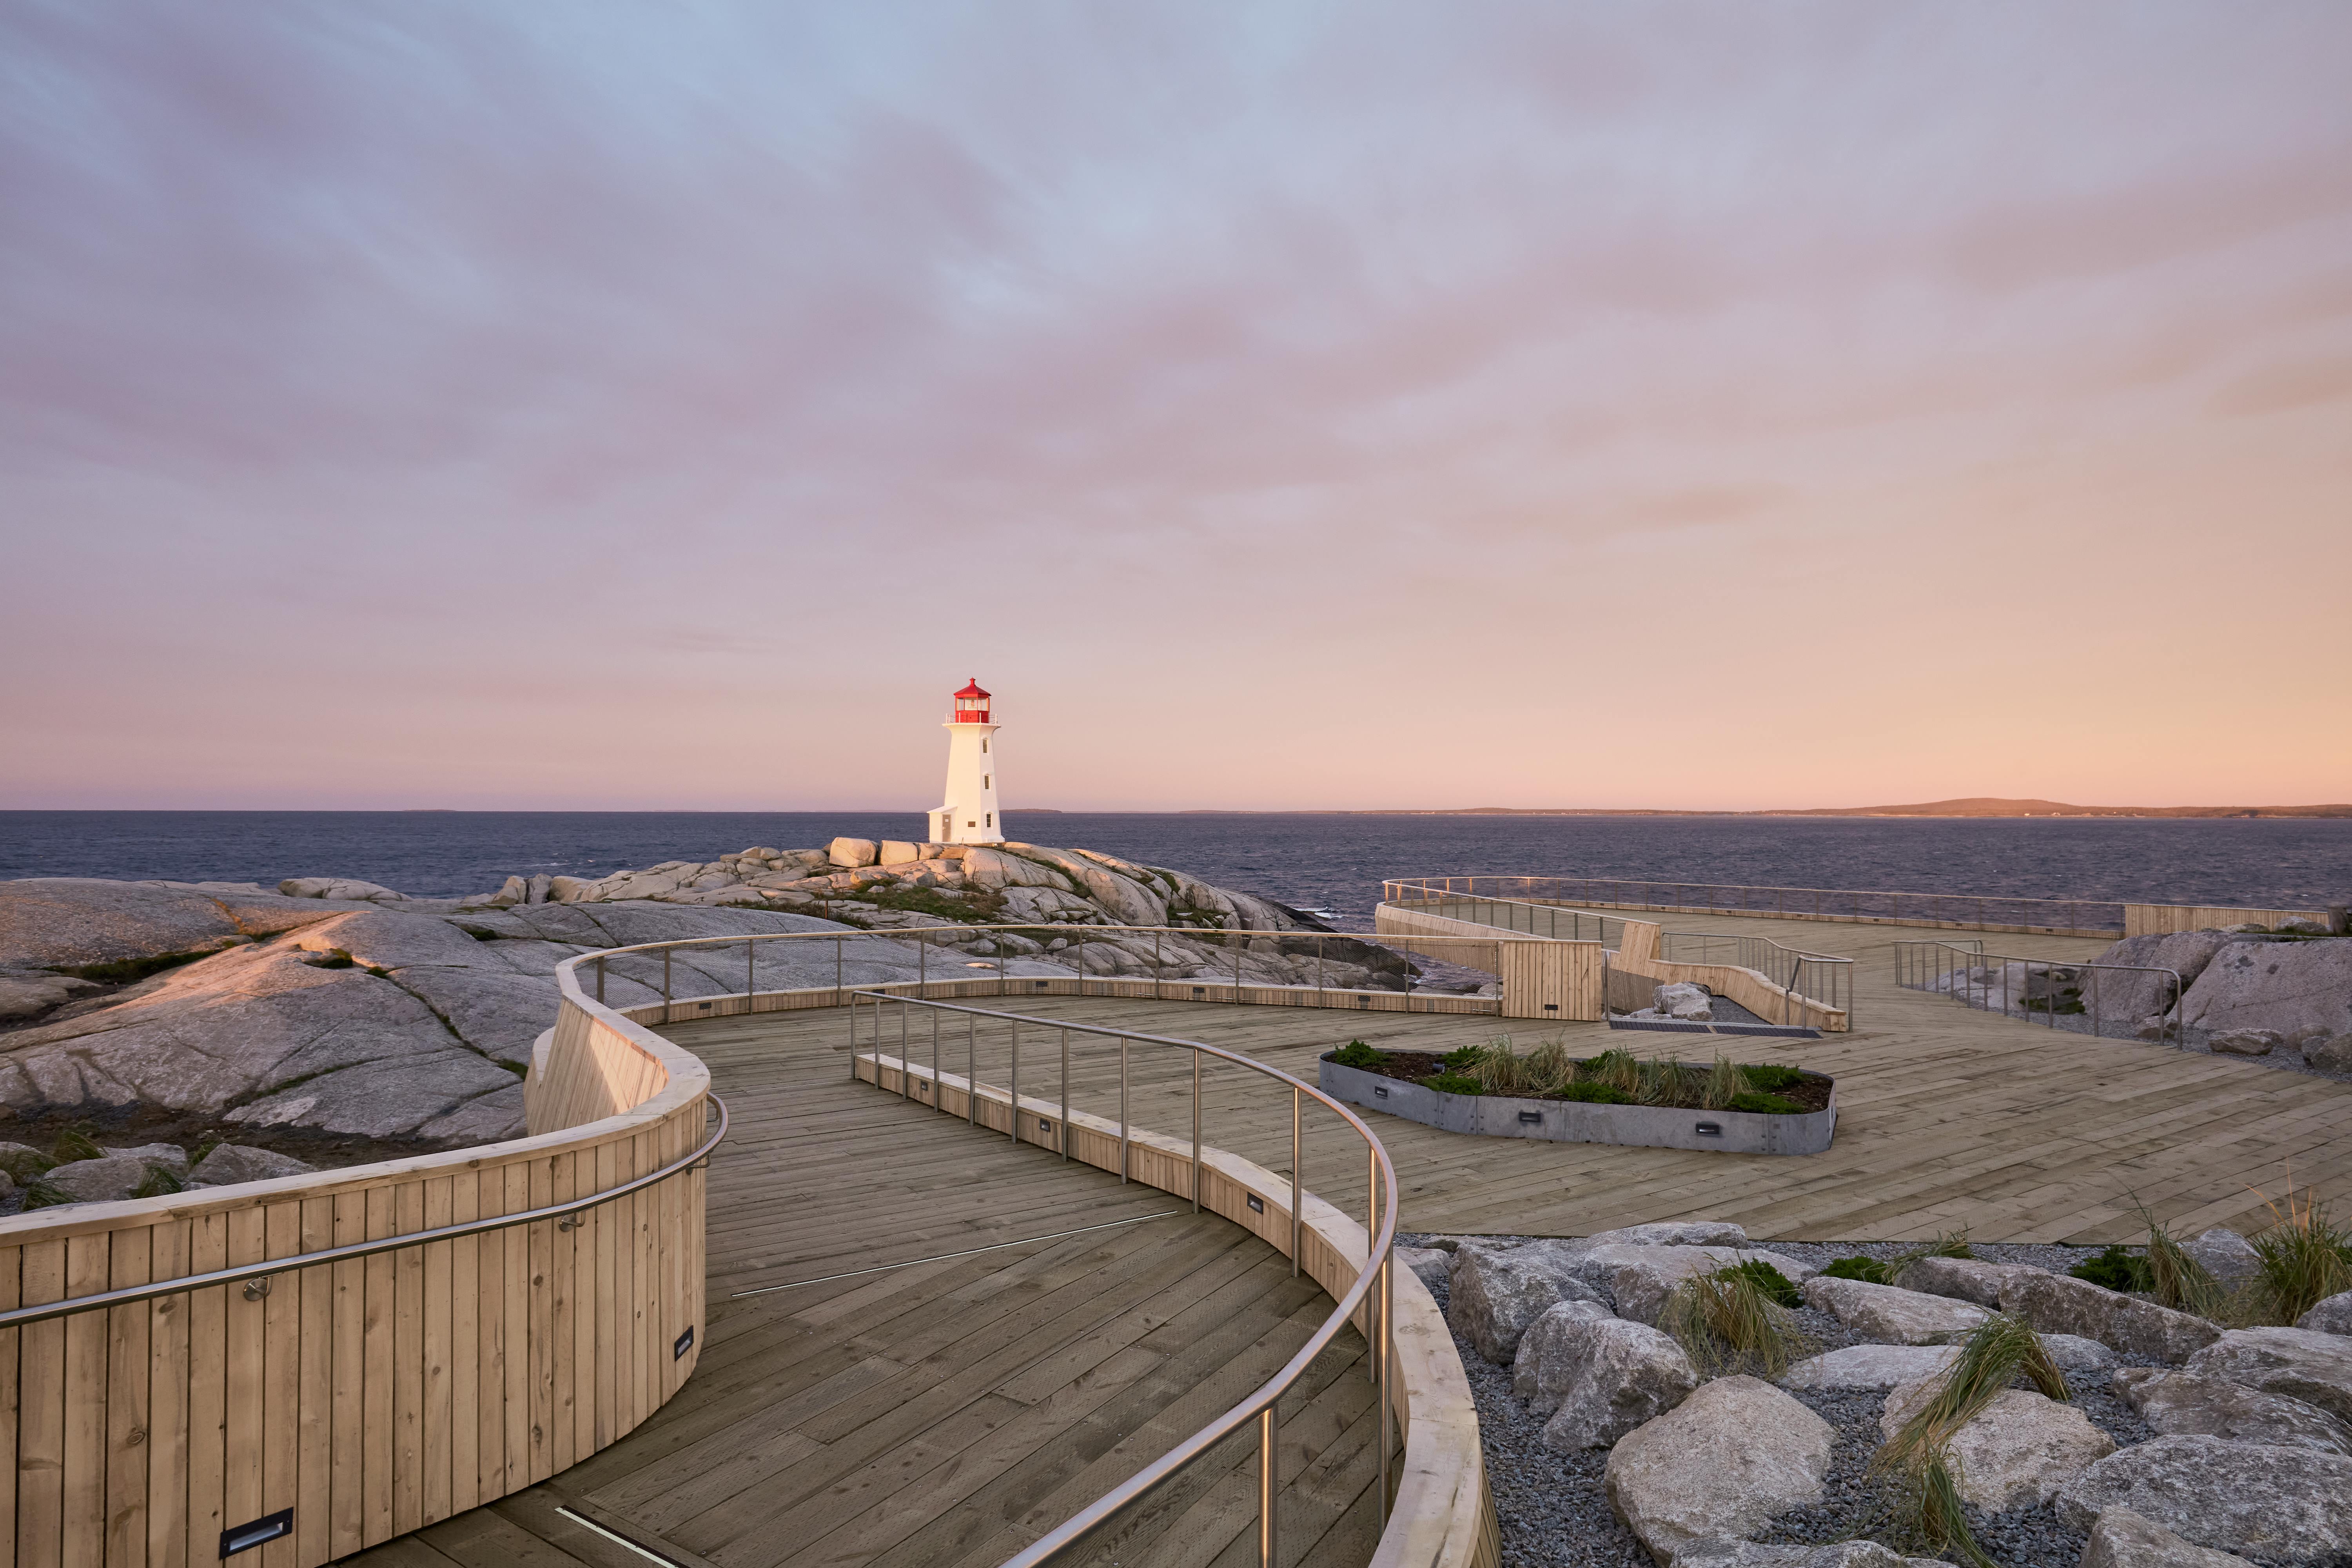 A shot of Peggy's Cove Viewing Deck with a sunset and lighthouse in the background.